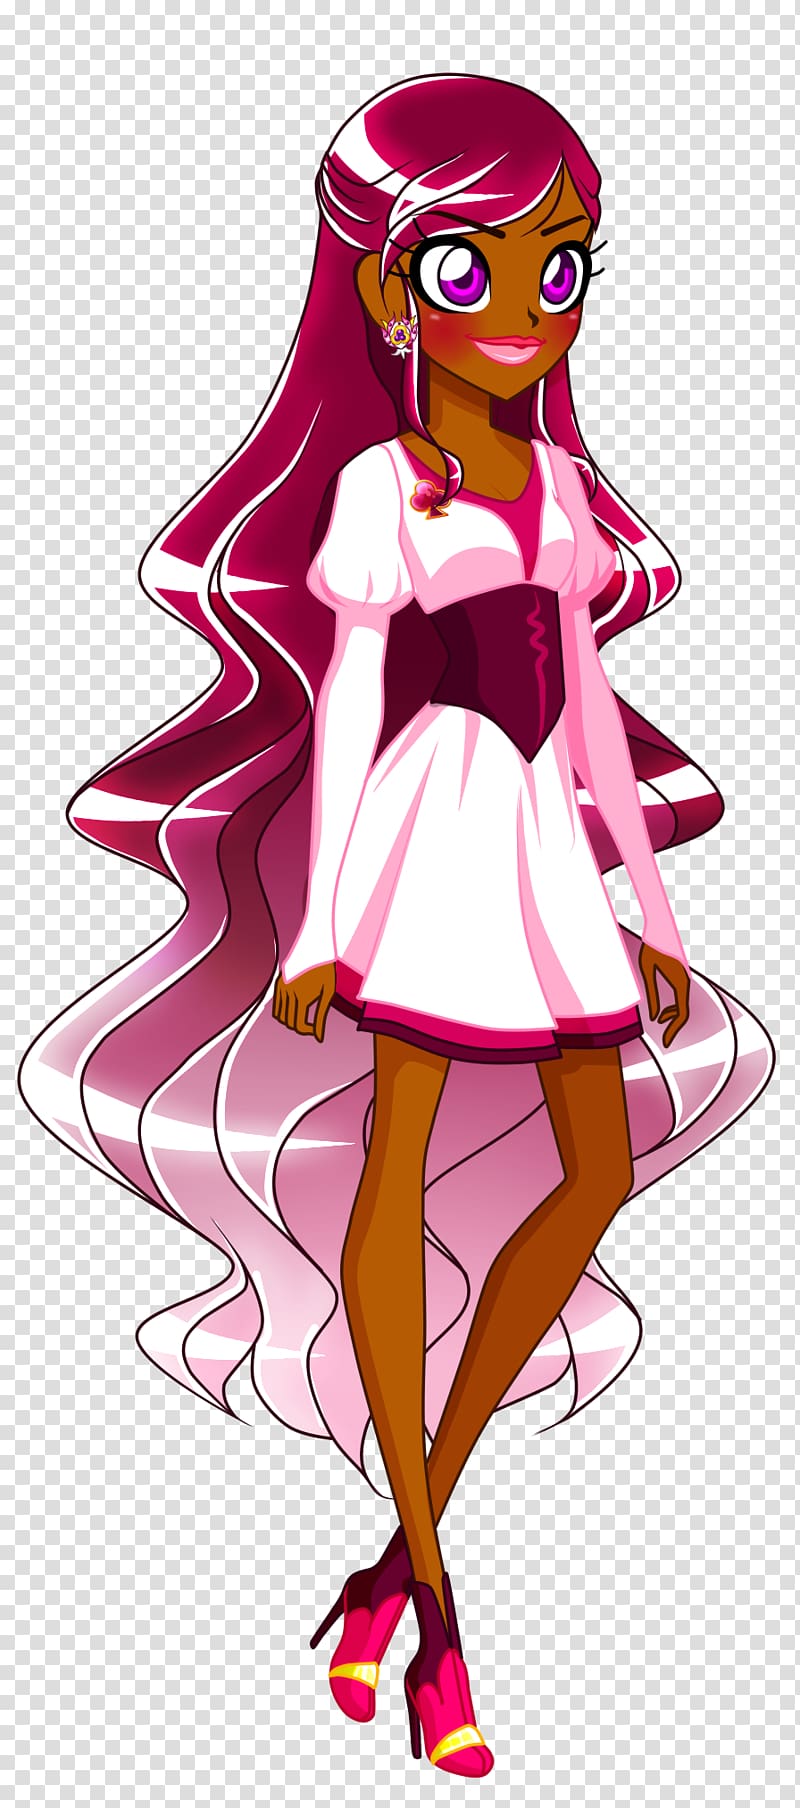 LoliRock Xeris New Star Generation Art Anime, Princess For A Day transparent background PNG clipart